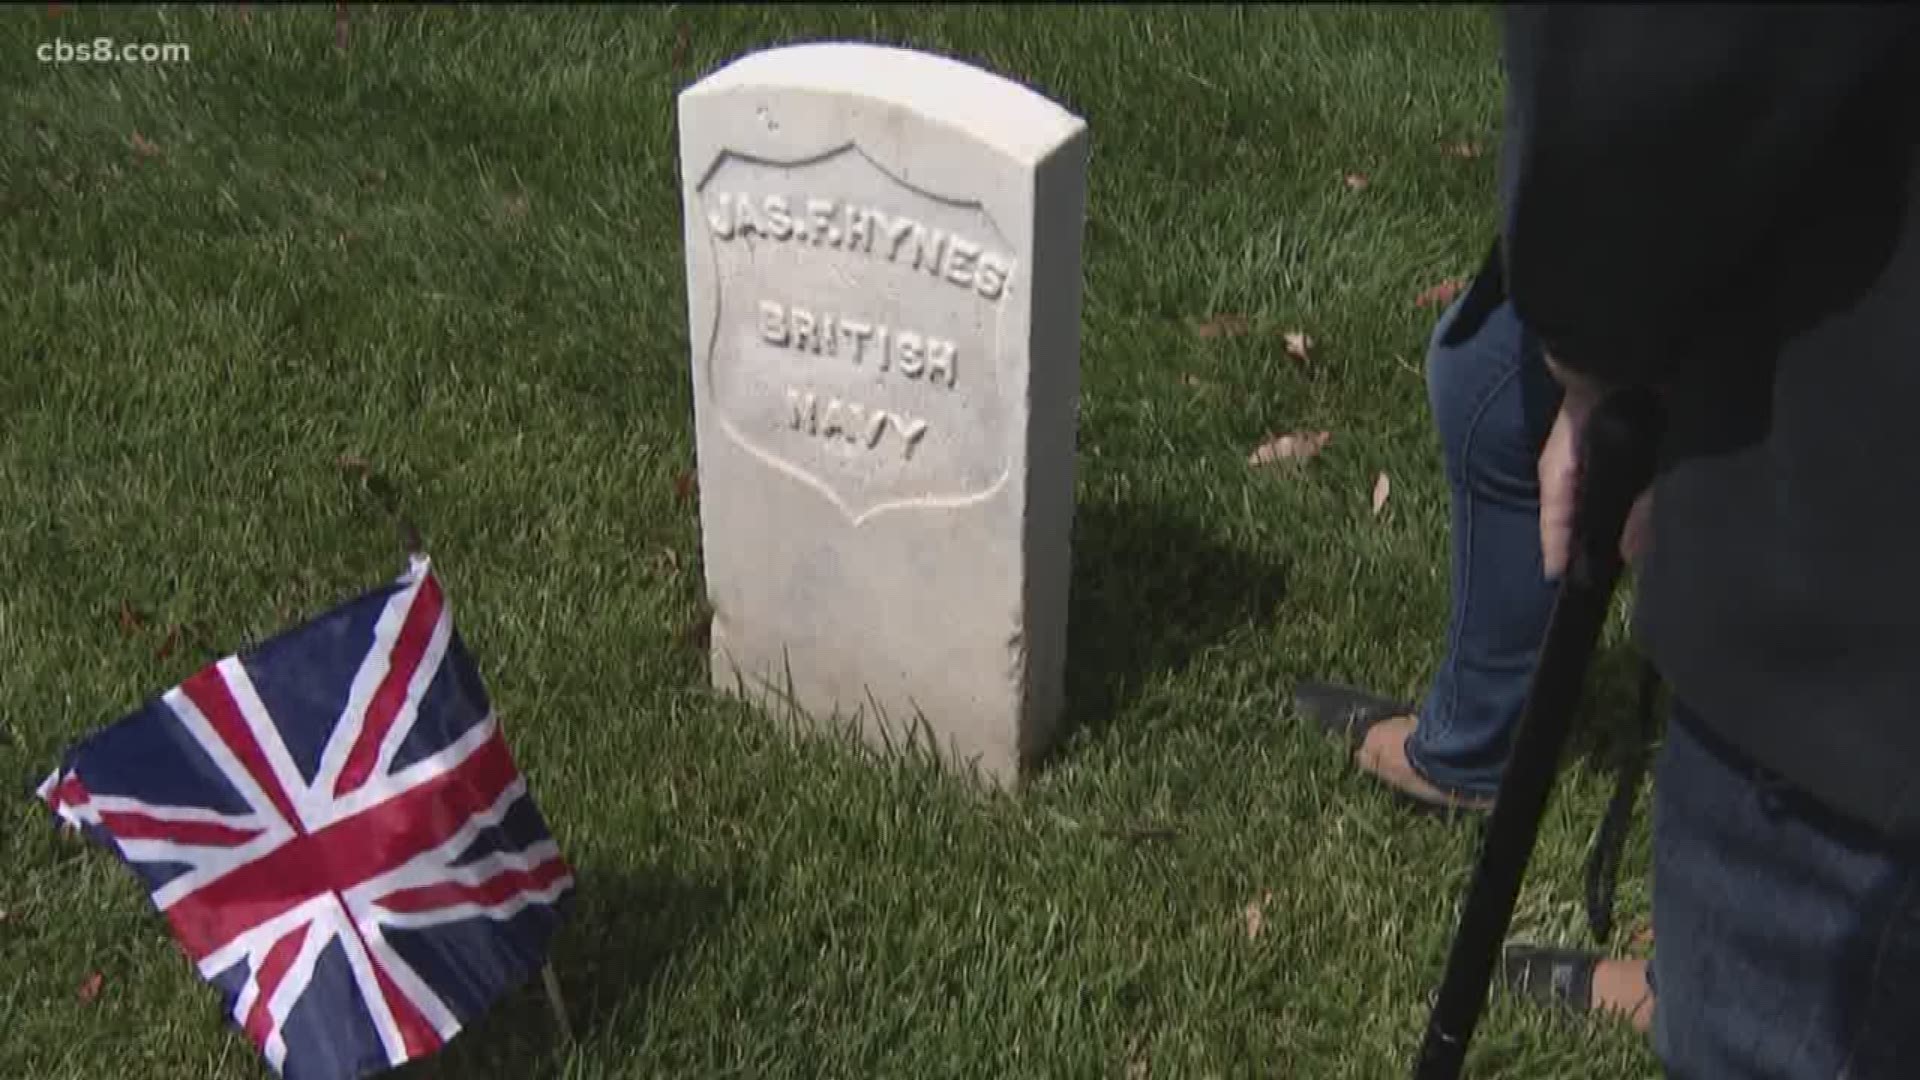 Interested in World War I, Ian McIntosh says a grave at Fort Rosecrans National Cemetery caught his eye because of the words "British Navy."